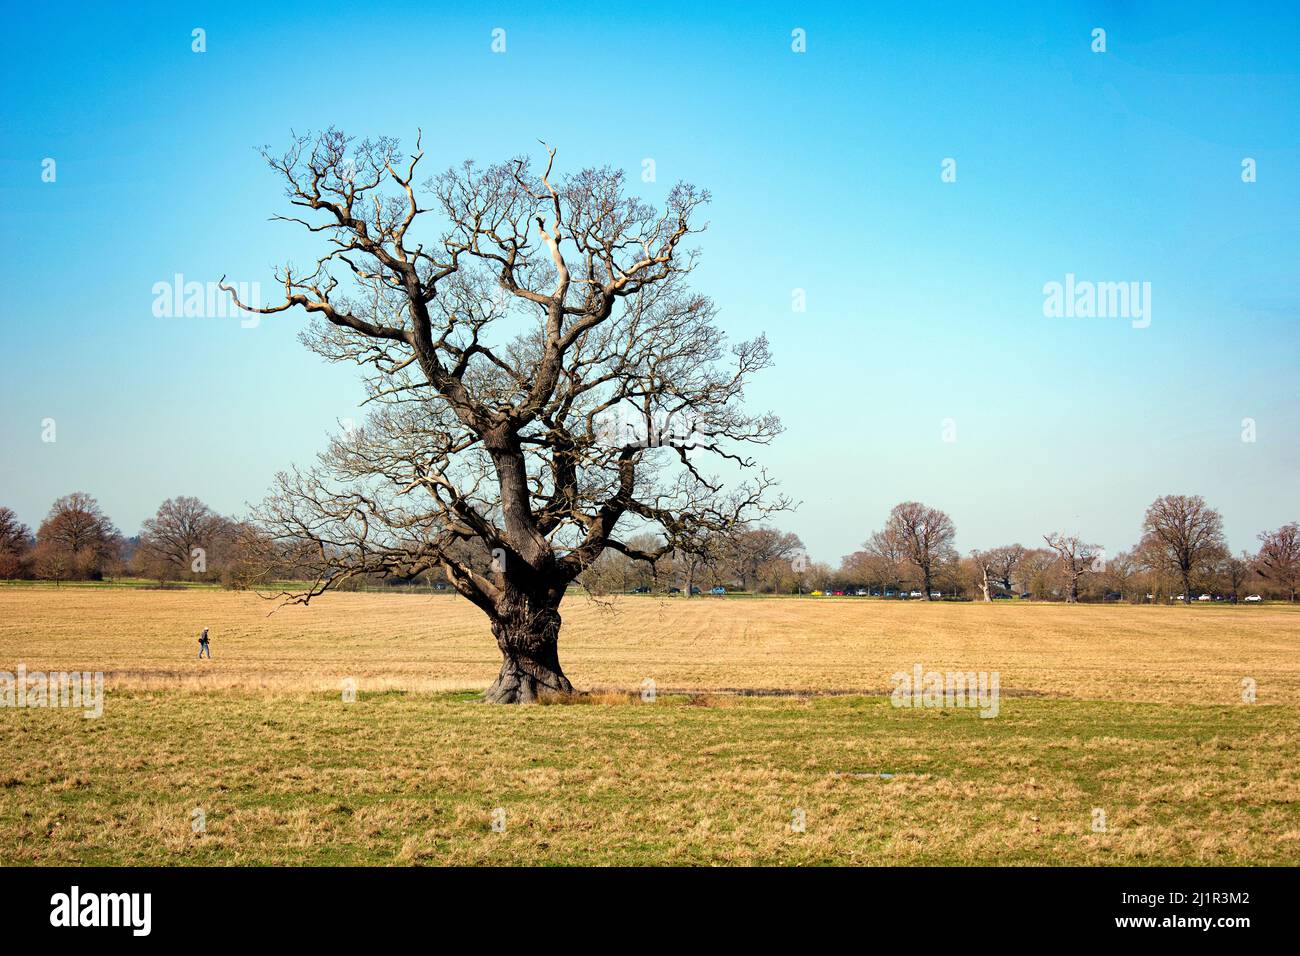 A large lonely tree with bare branches Stock Photo